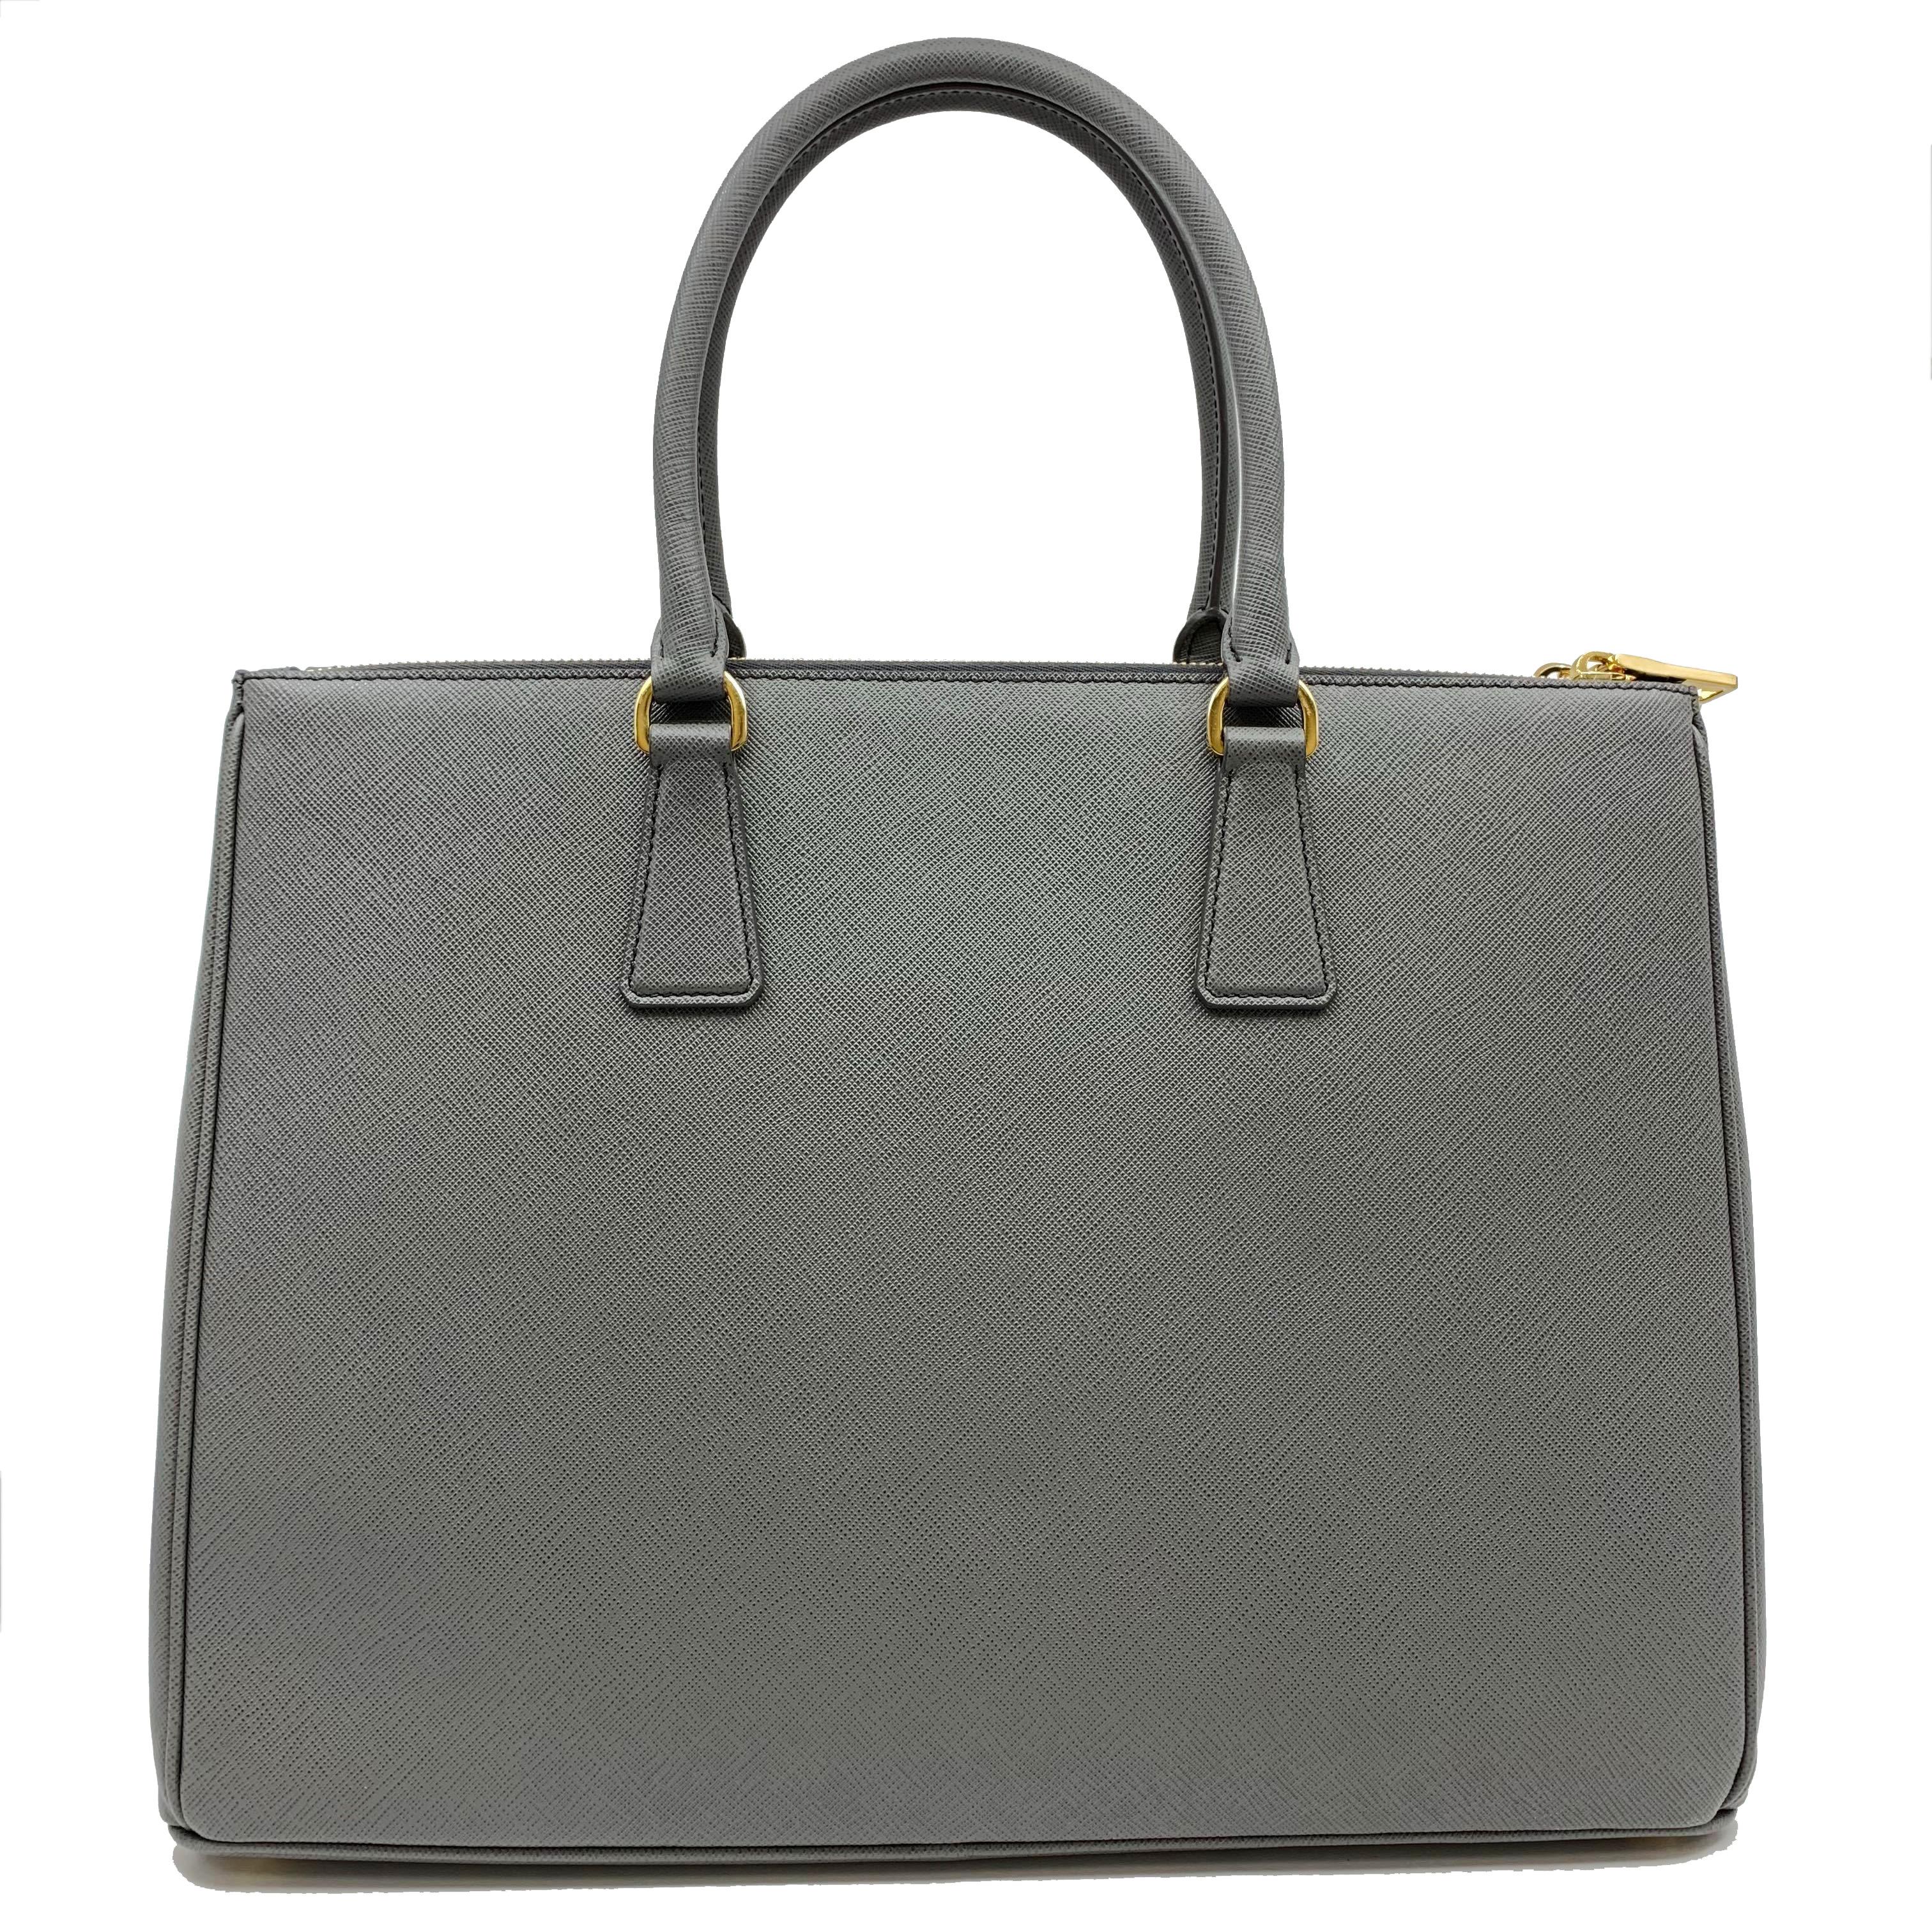 Prada's Galleria saffiano tote is a perfectly prim addition to your accessories edit. Crafted from textured gray calf leather, this design is finished with dainty top handles and golden hardware. Double storage compartments leave ample room for